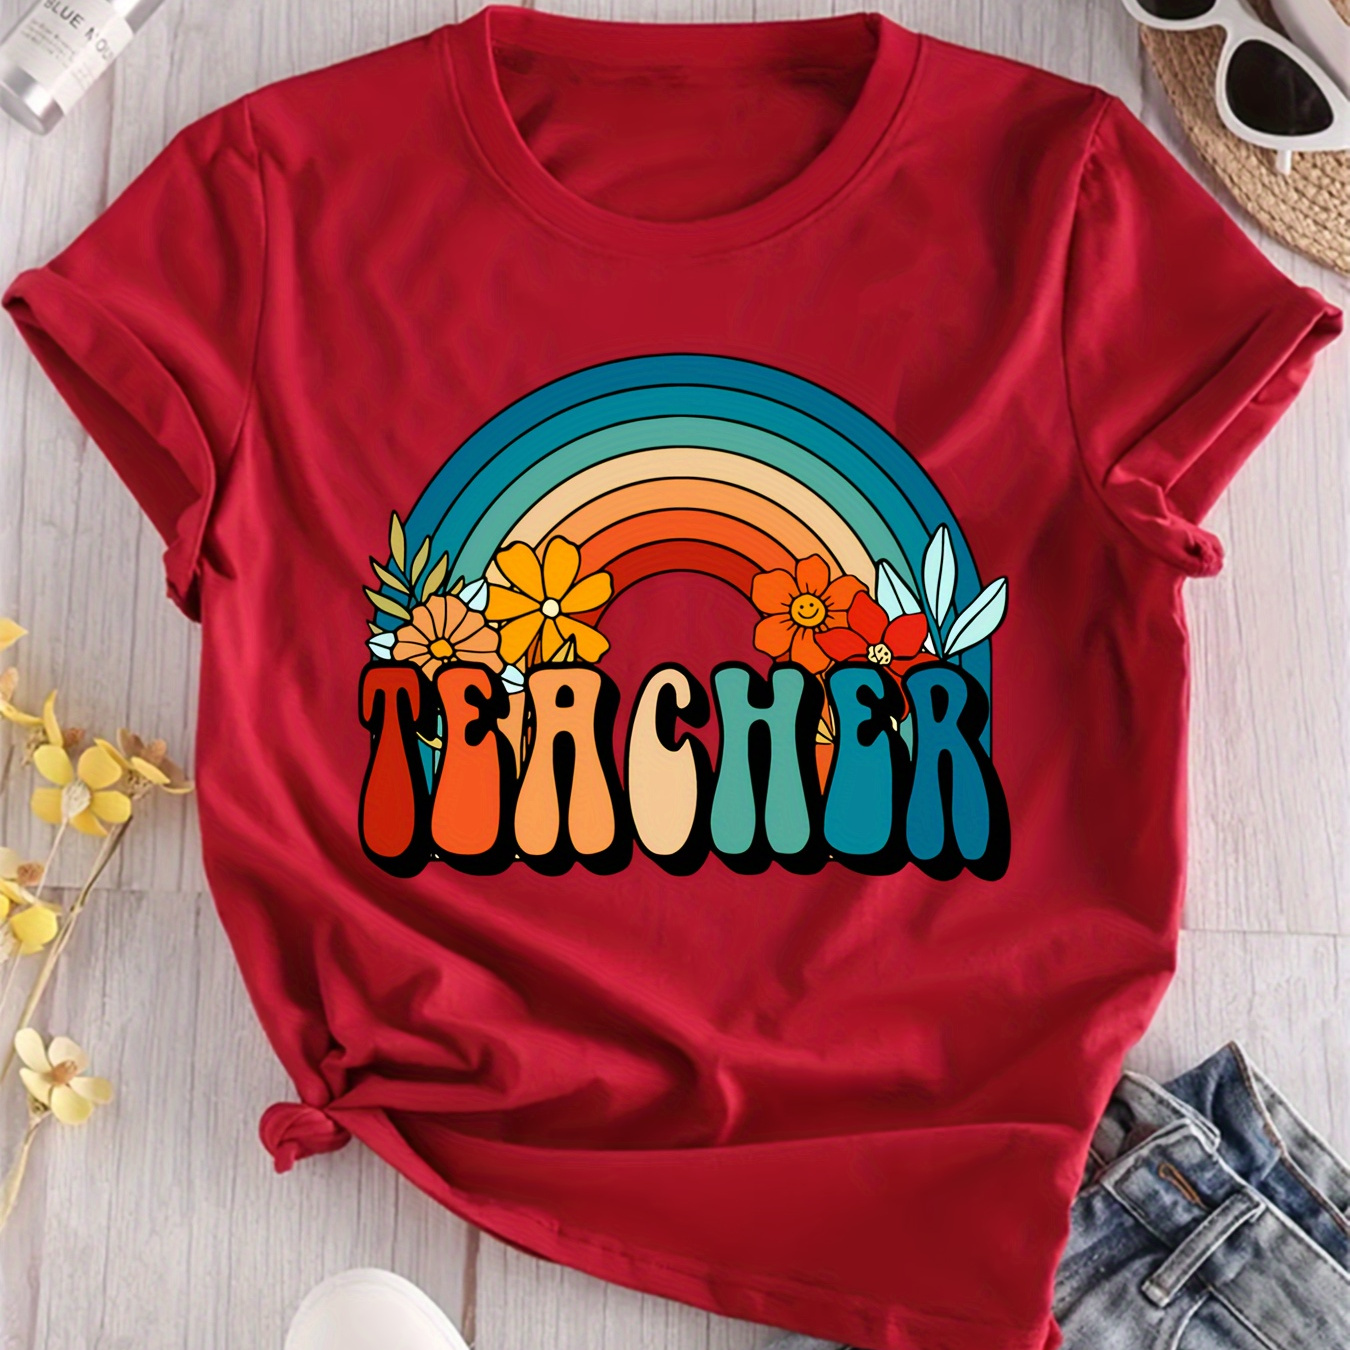 

Plus Size Teacher & Rainbow Print T-shirt, Casual Short Sleeve Crew Neck Top For Spring & Summer, Women's Plus Size Clothing